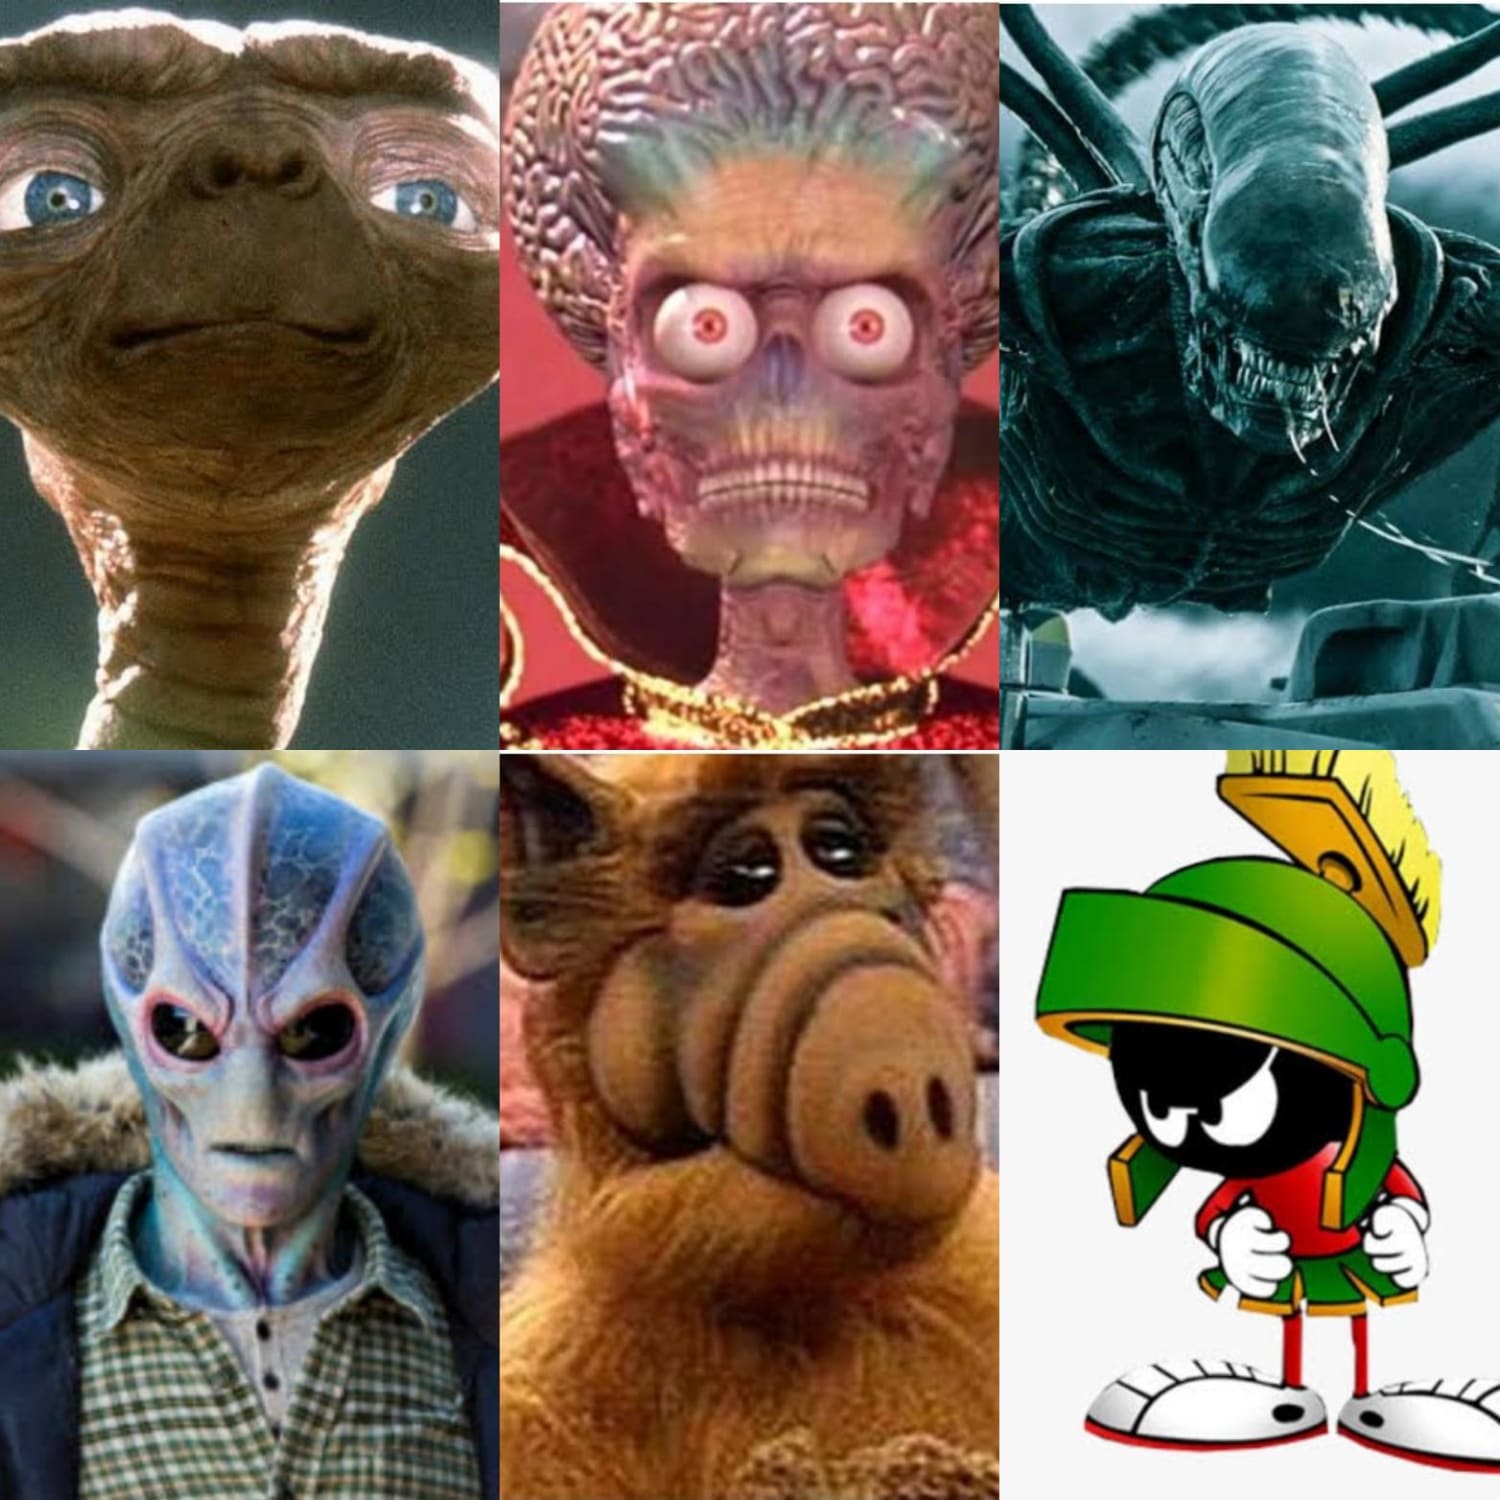 Who's your favourite alien?